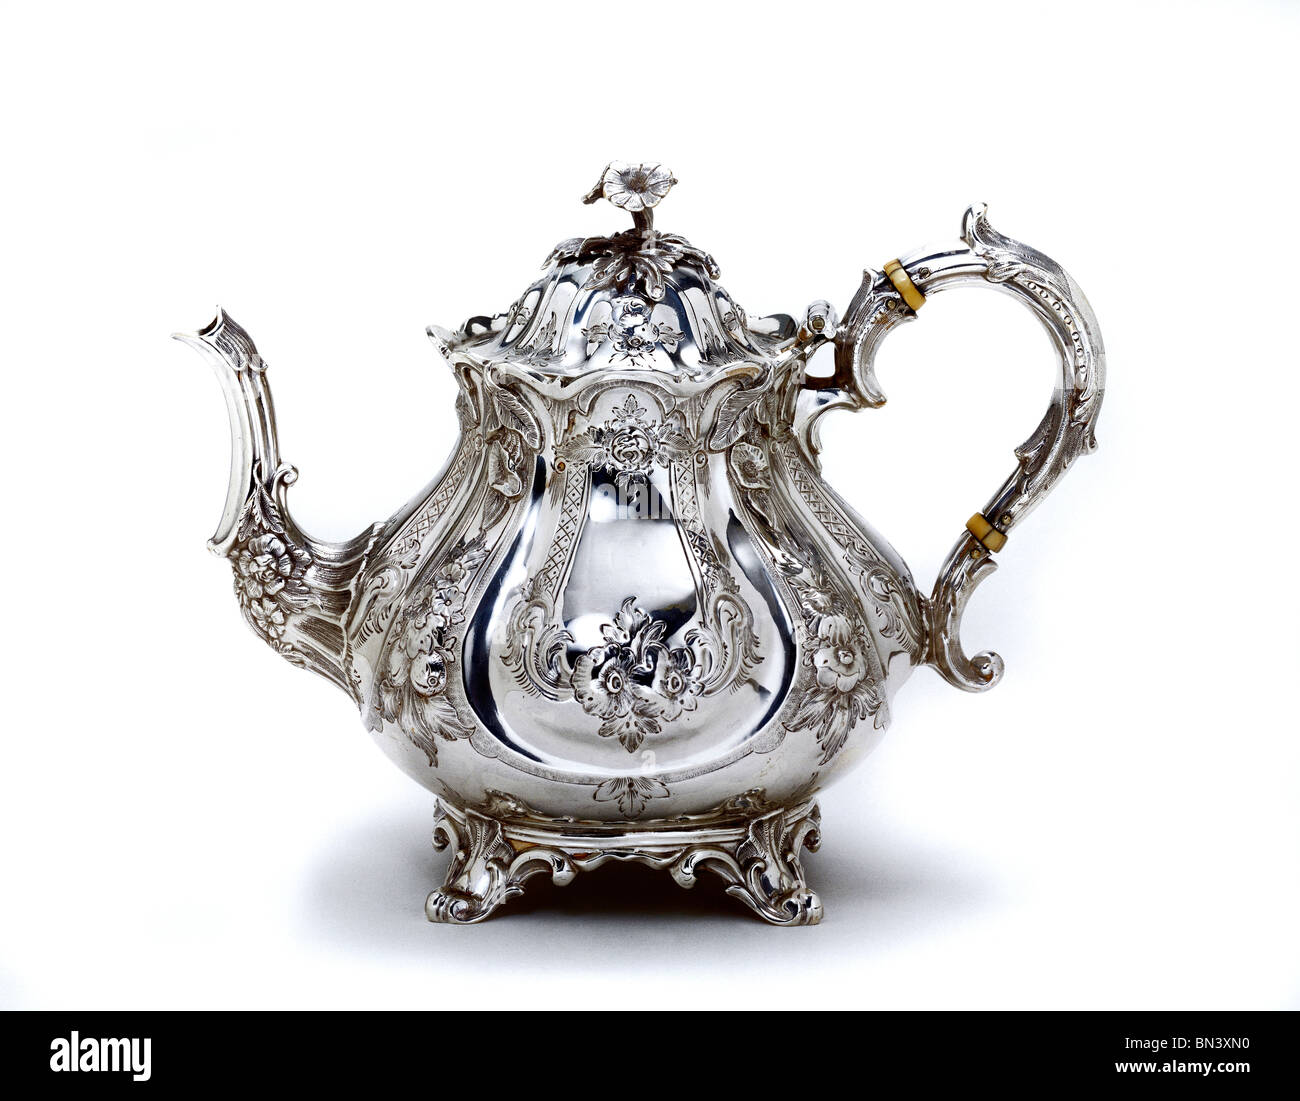 Teapot, by Martin Hall & Co. Silver, ivory handle. England, 1857. Stock Photo